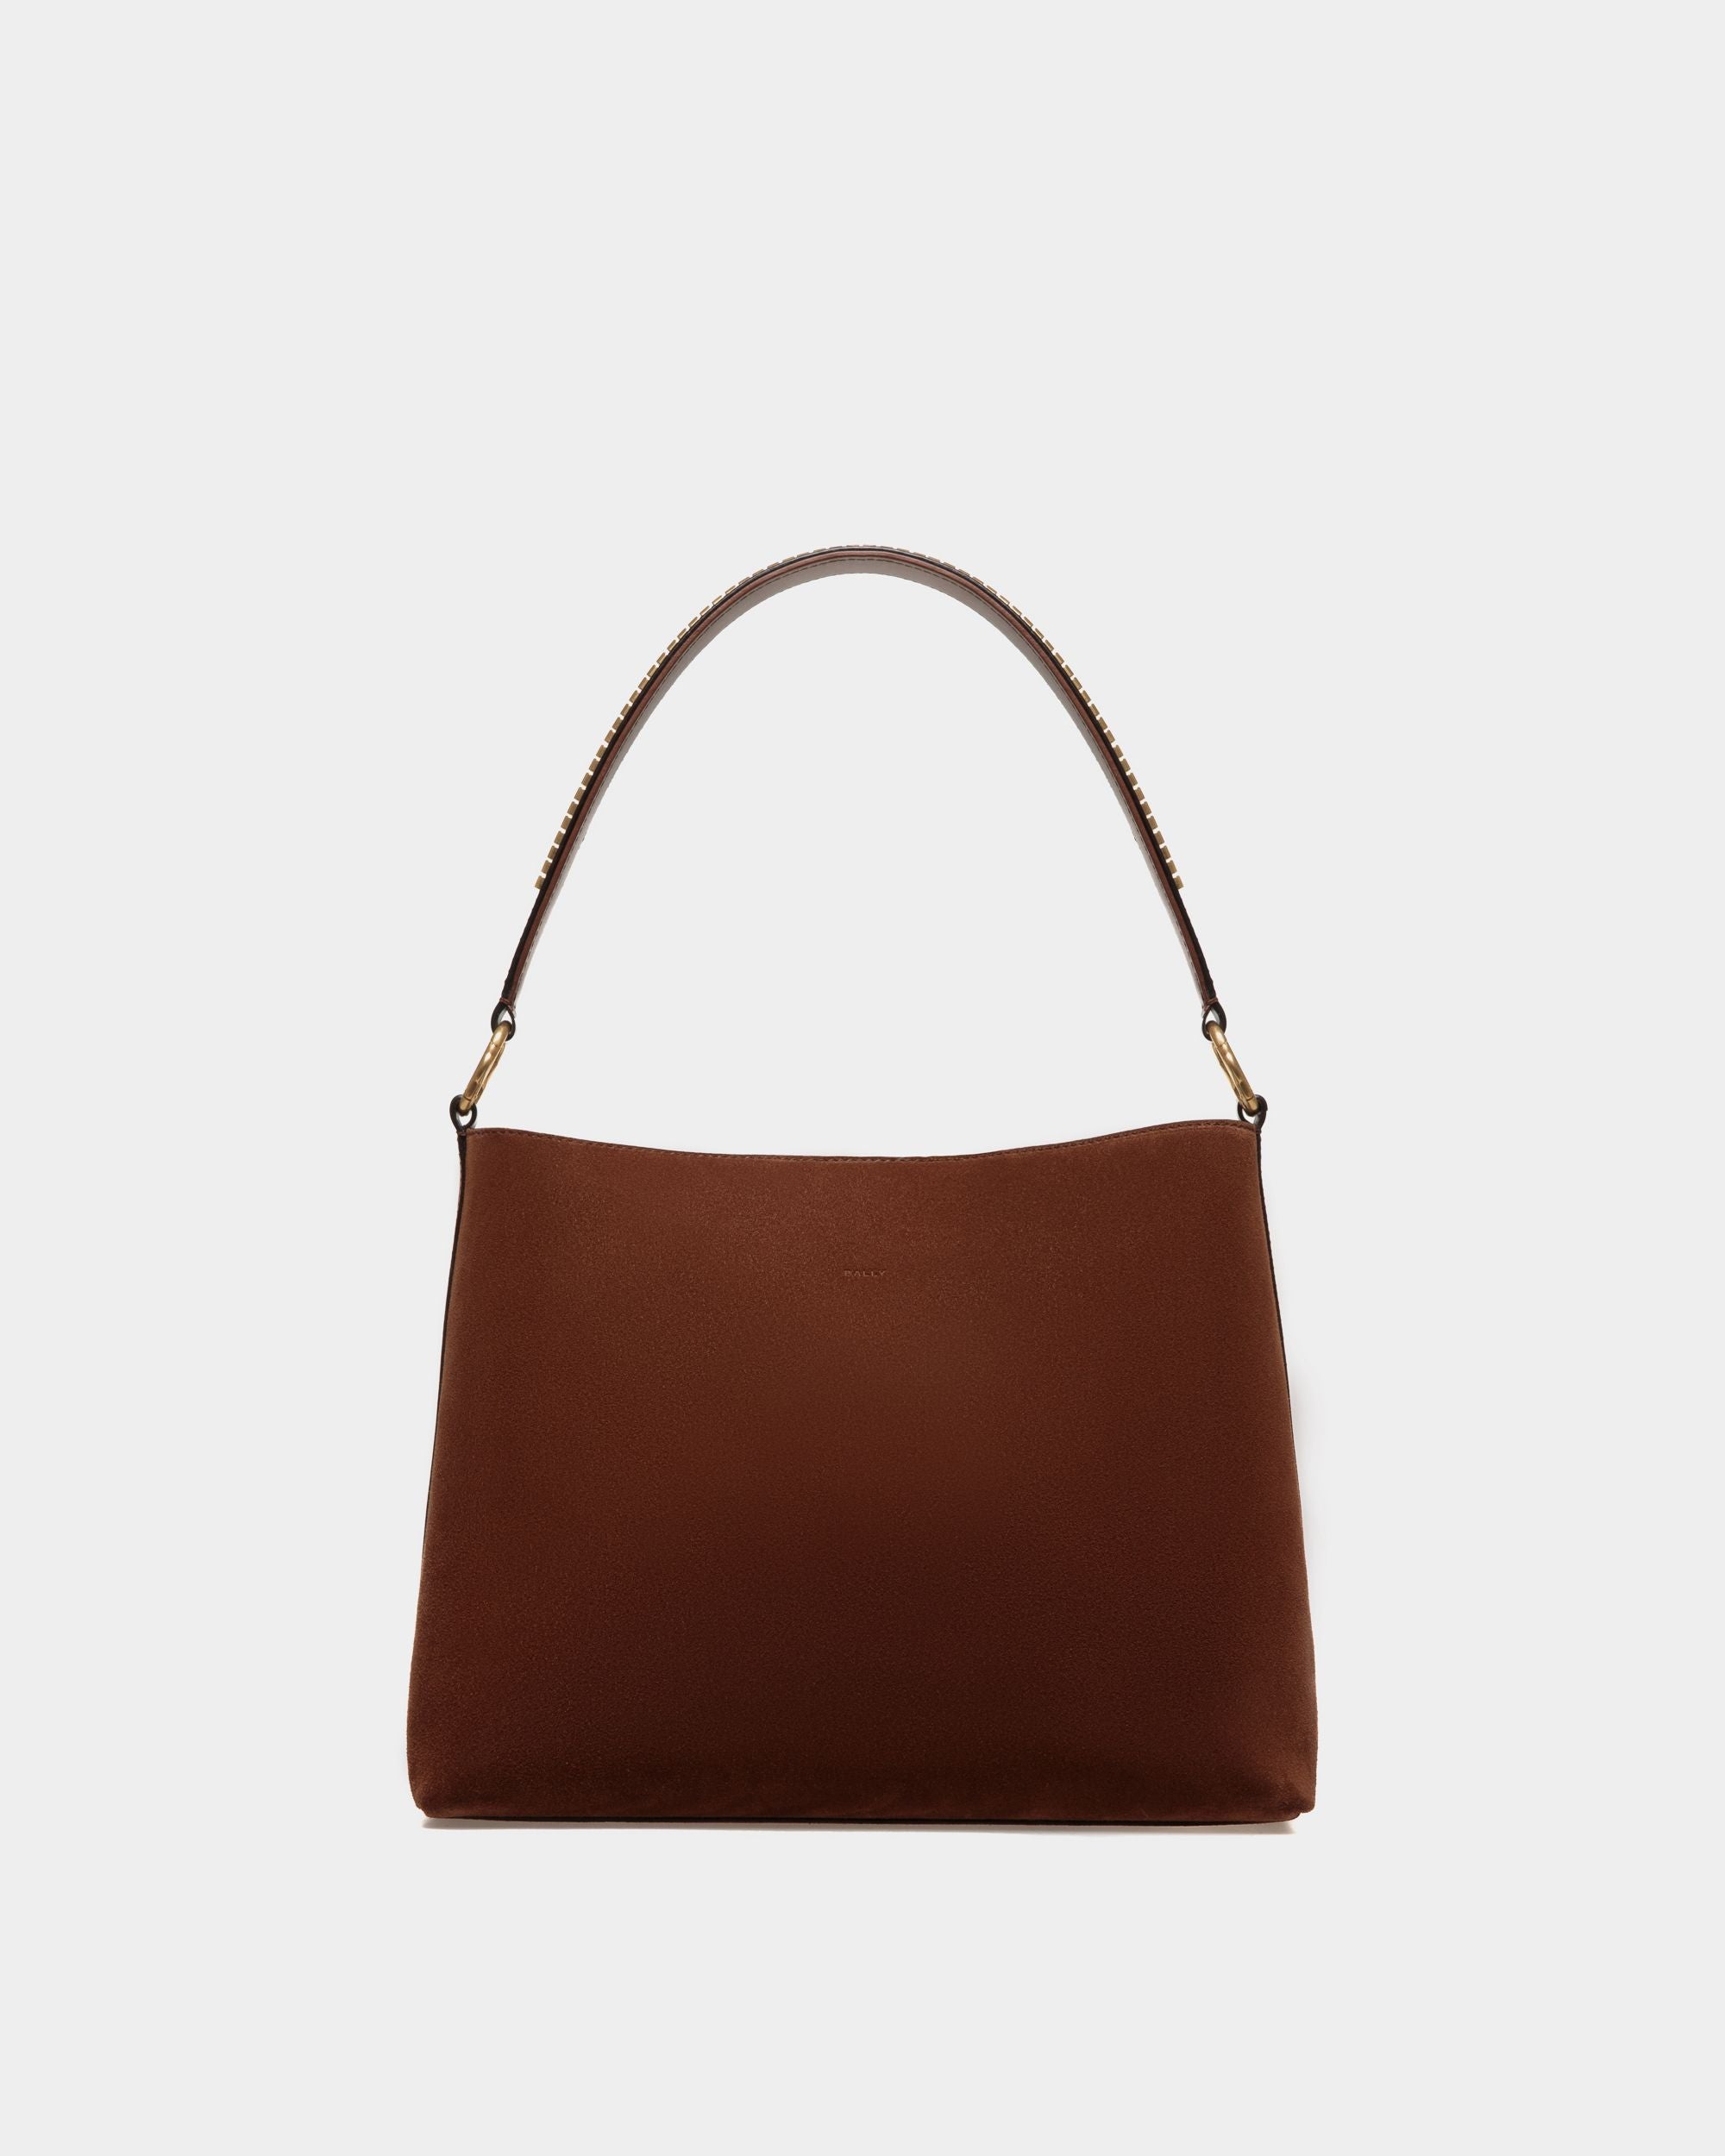 Women's Arkle Hobo Bag in Suede | Bally | Still Life Front